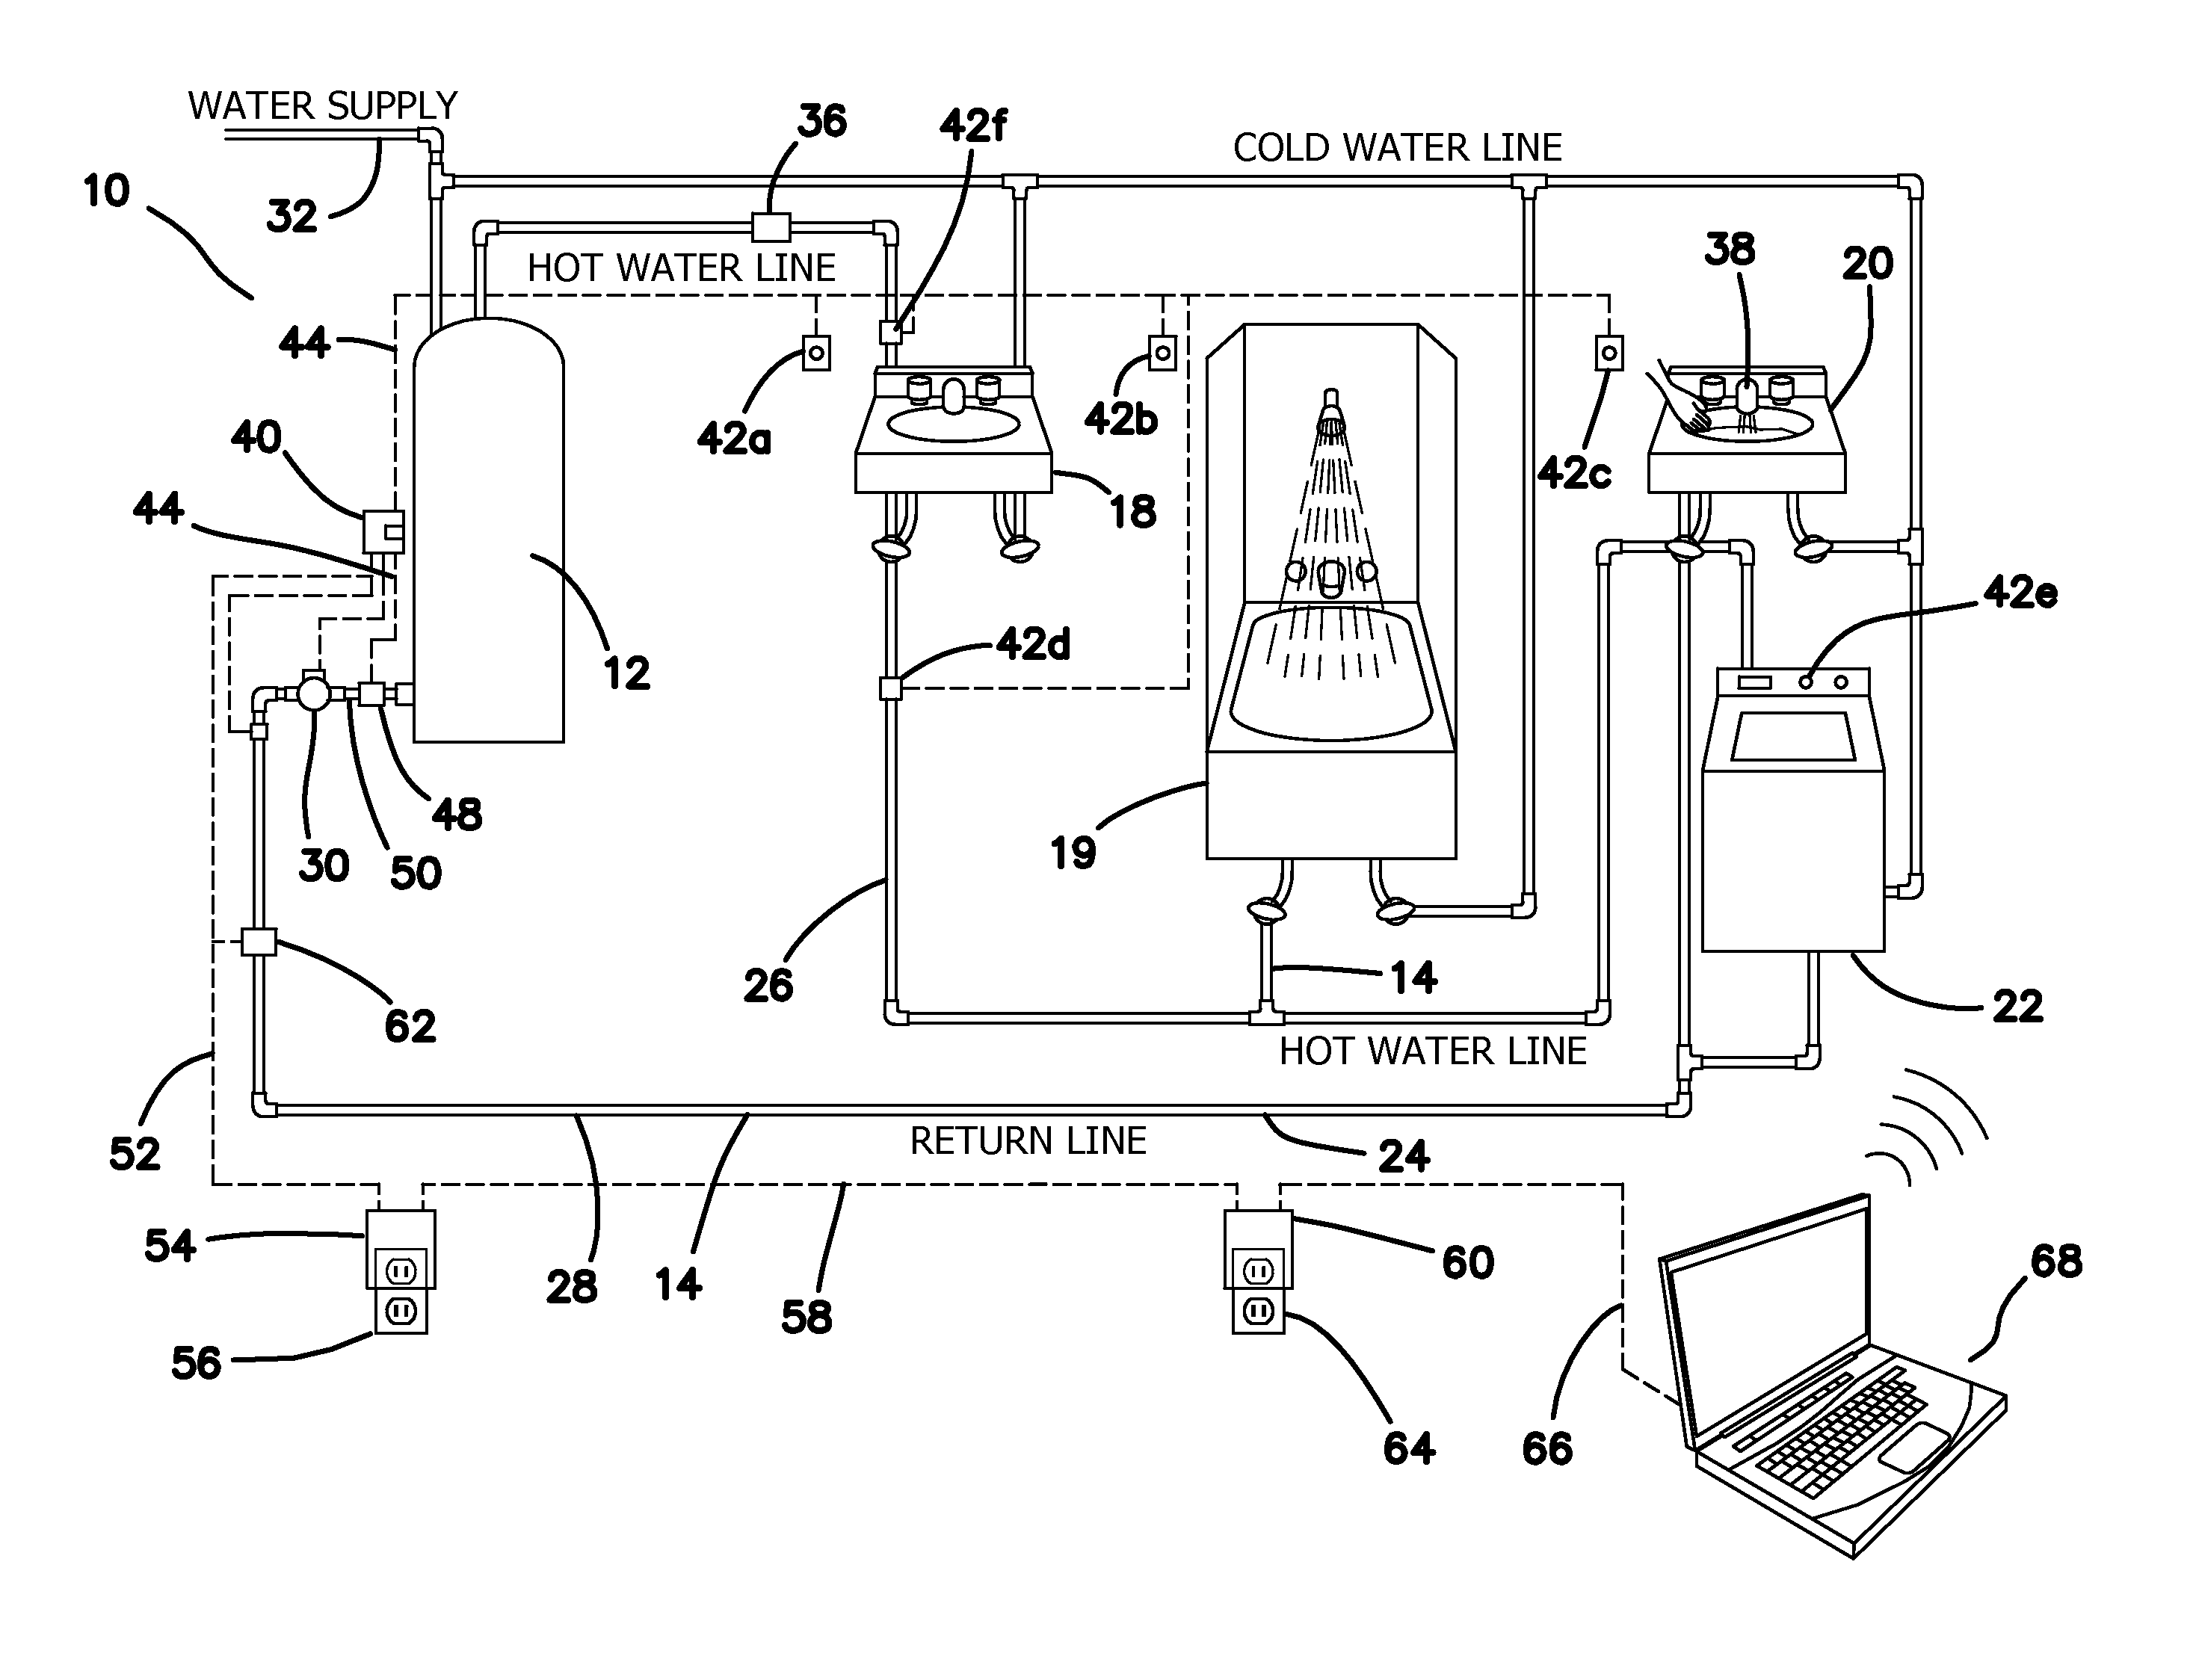 Methods and apparatus for remotely monitoring and/or controlling a plumbing system